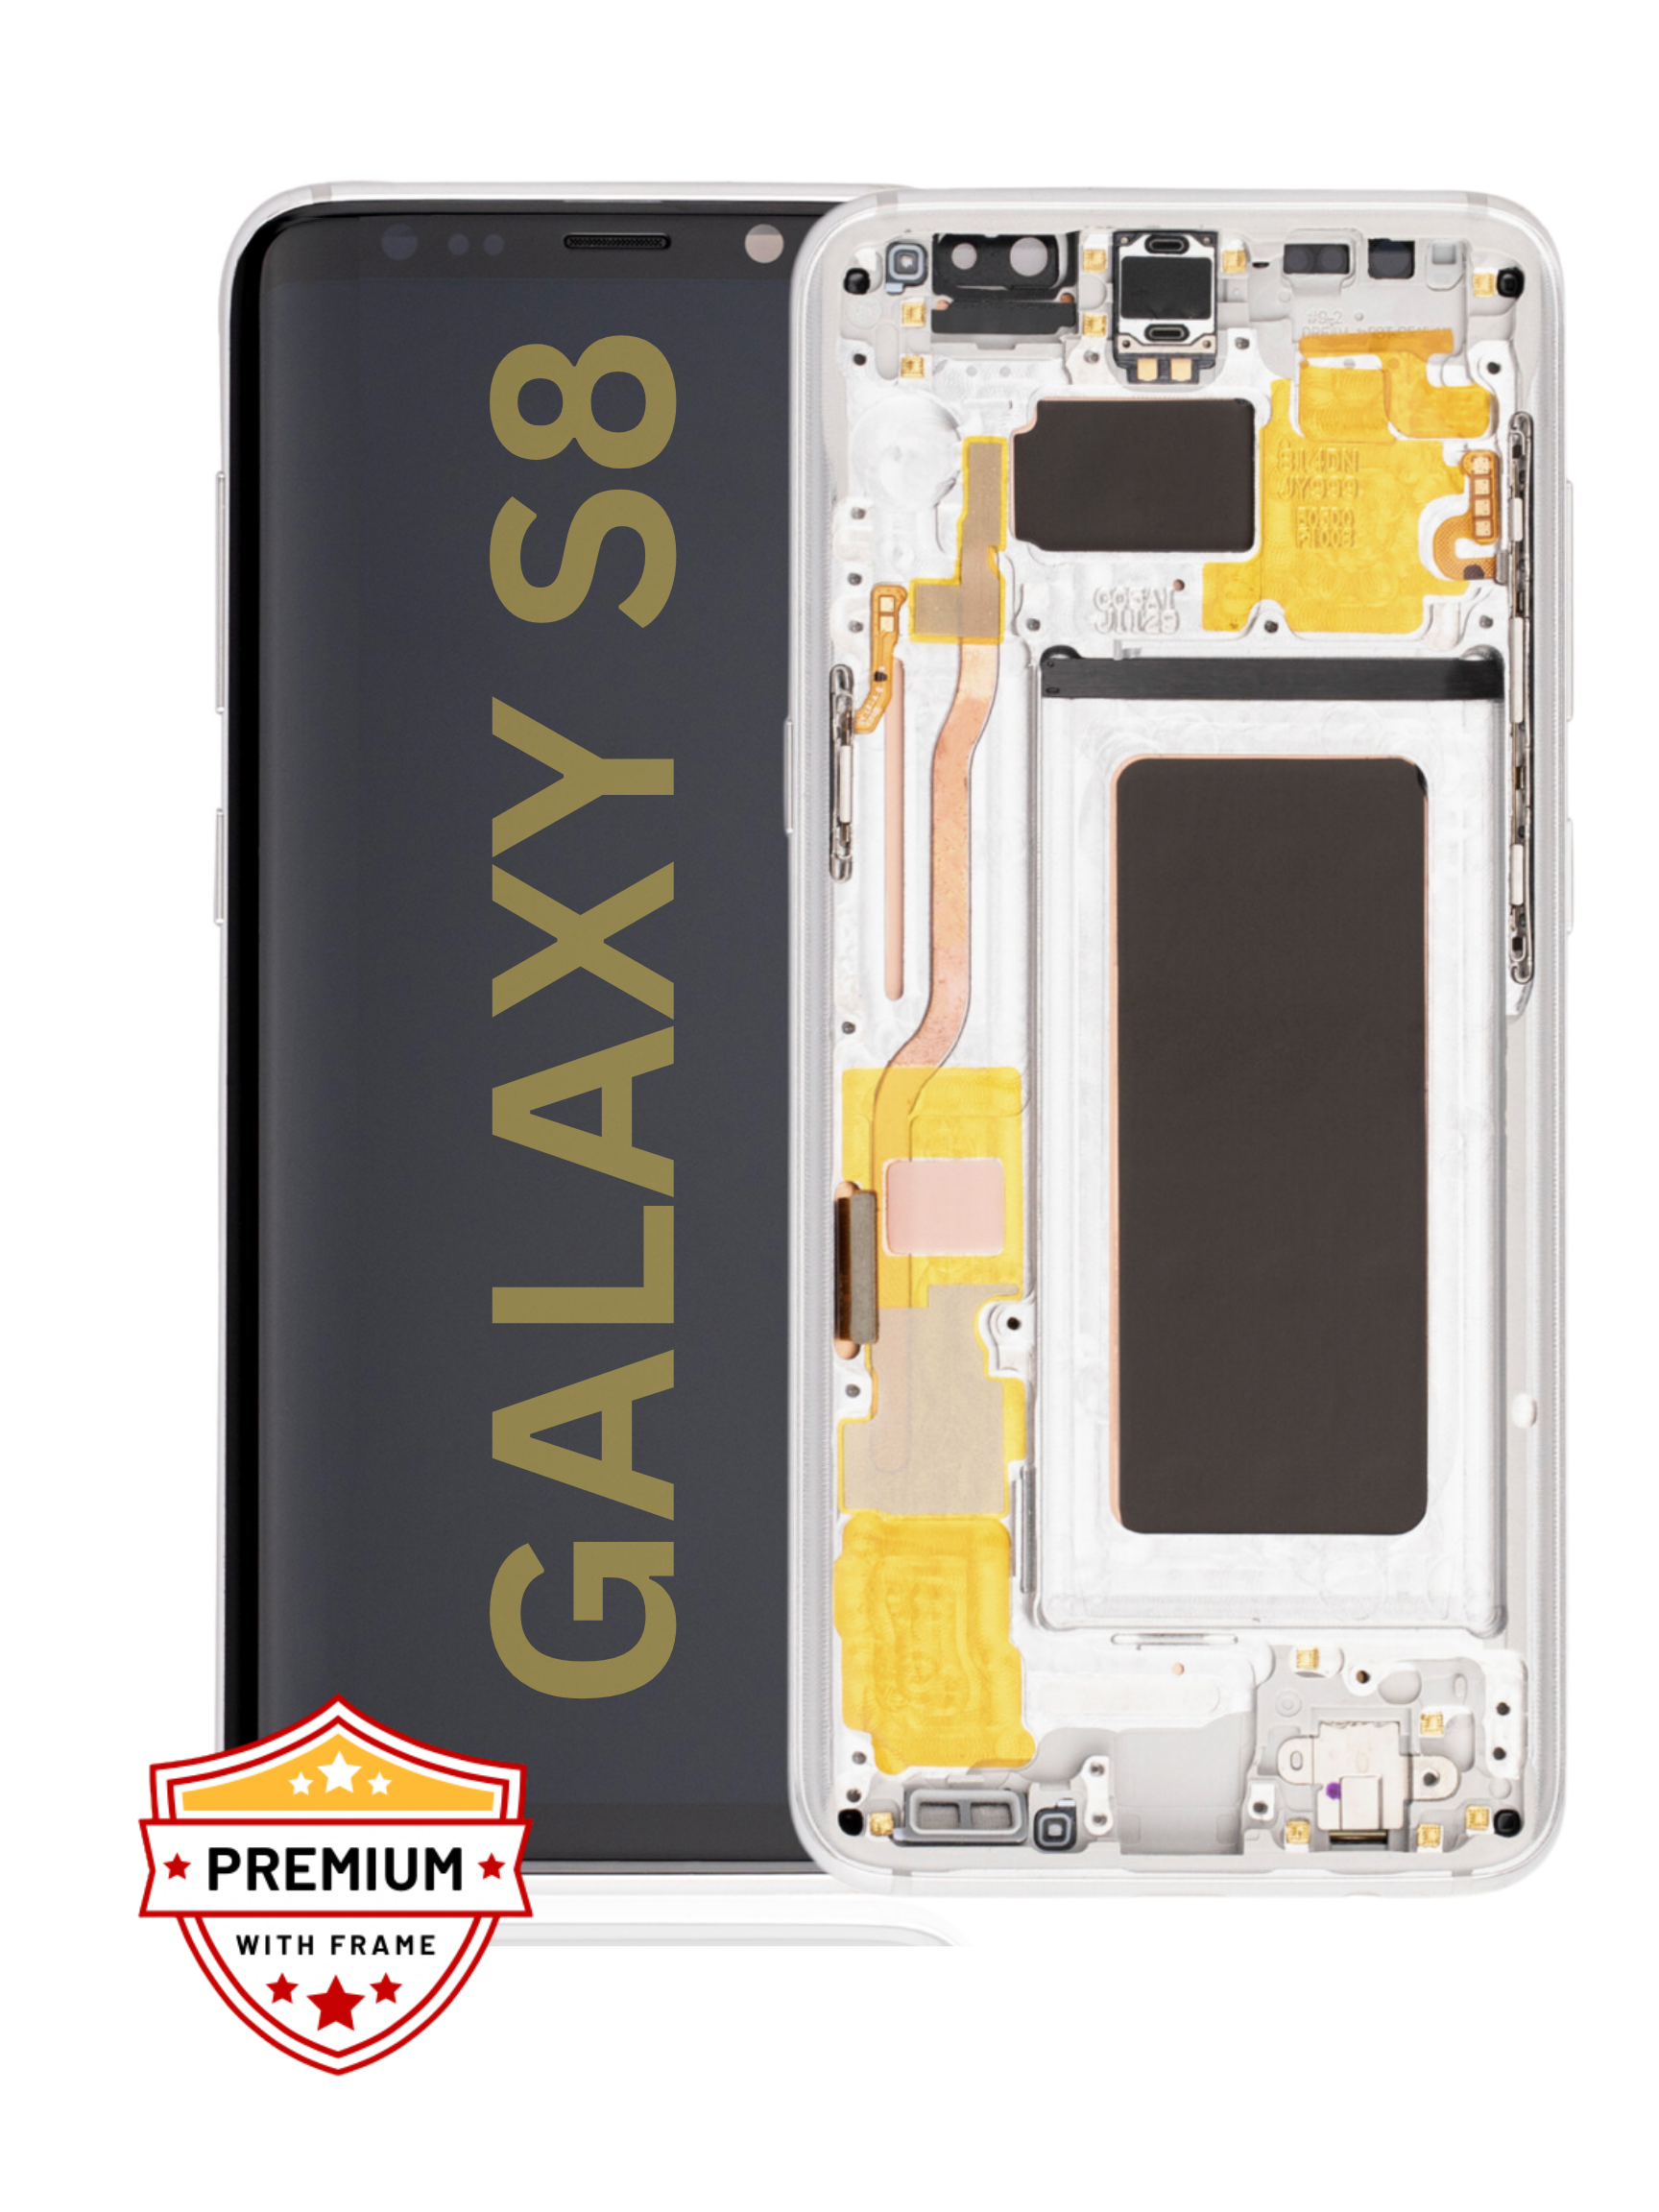 (Refurbished) Samsung Galaxy S8 OLED Display with Frame (Silver)